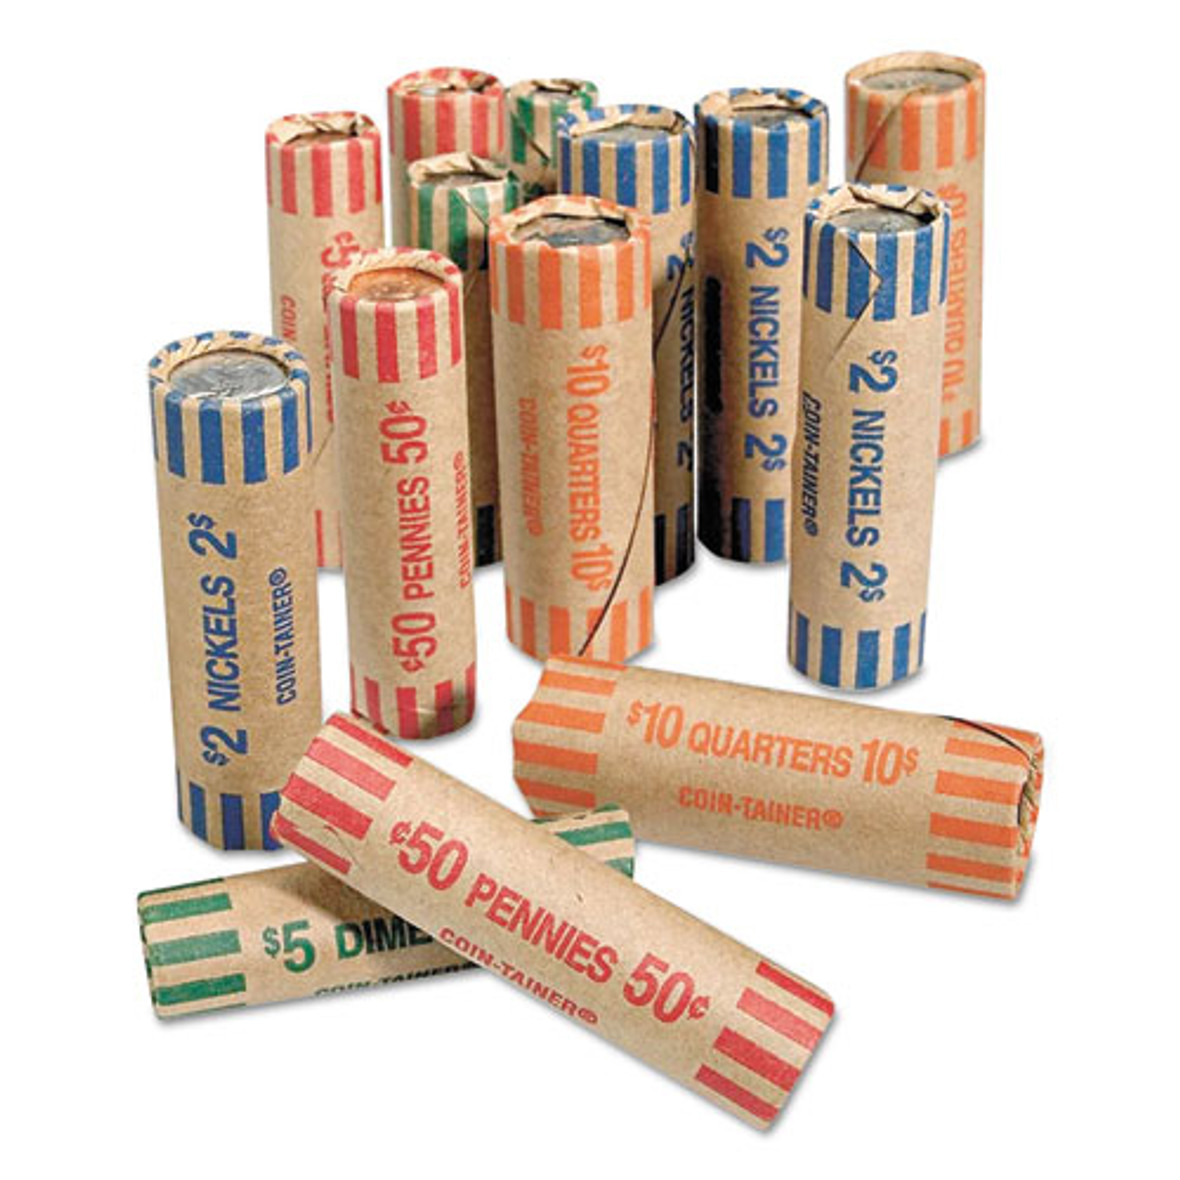 Pap-R Products Preformed Tubular Coin Wrappers, Nickels, $2, 1000 Wrappers per Box